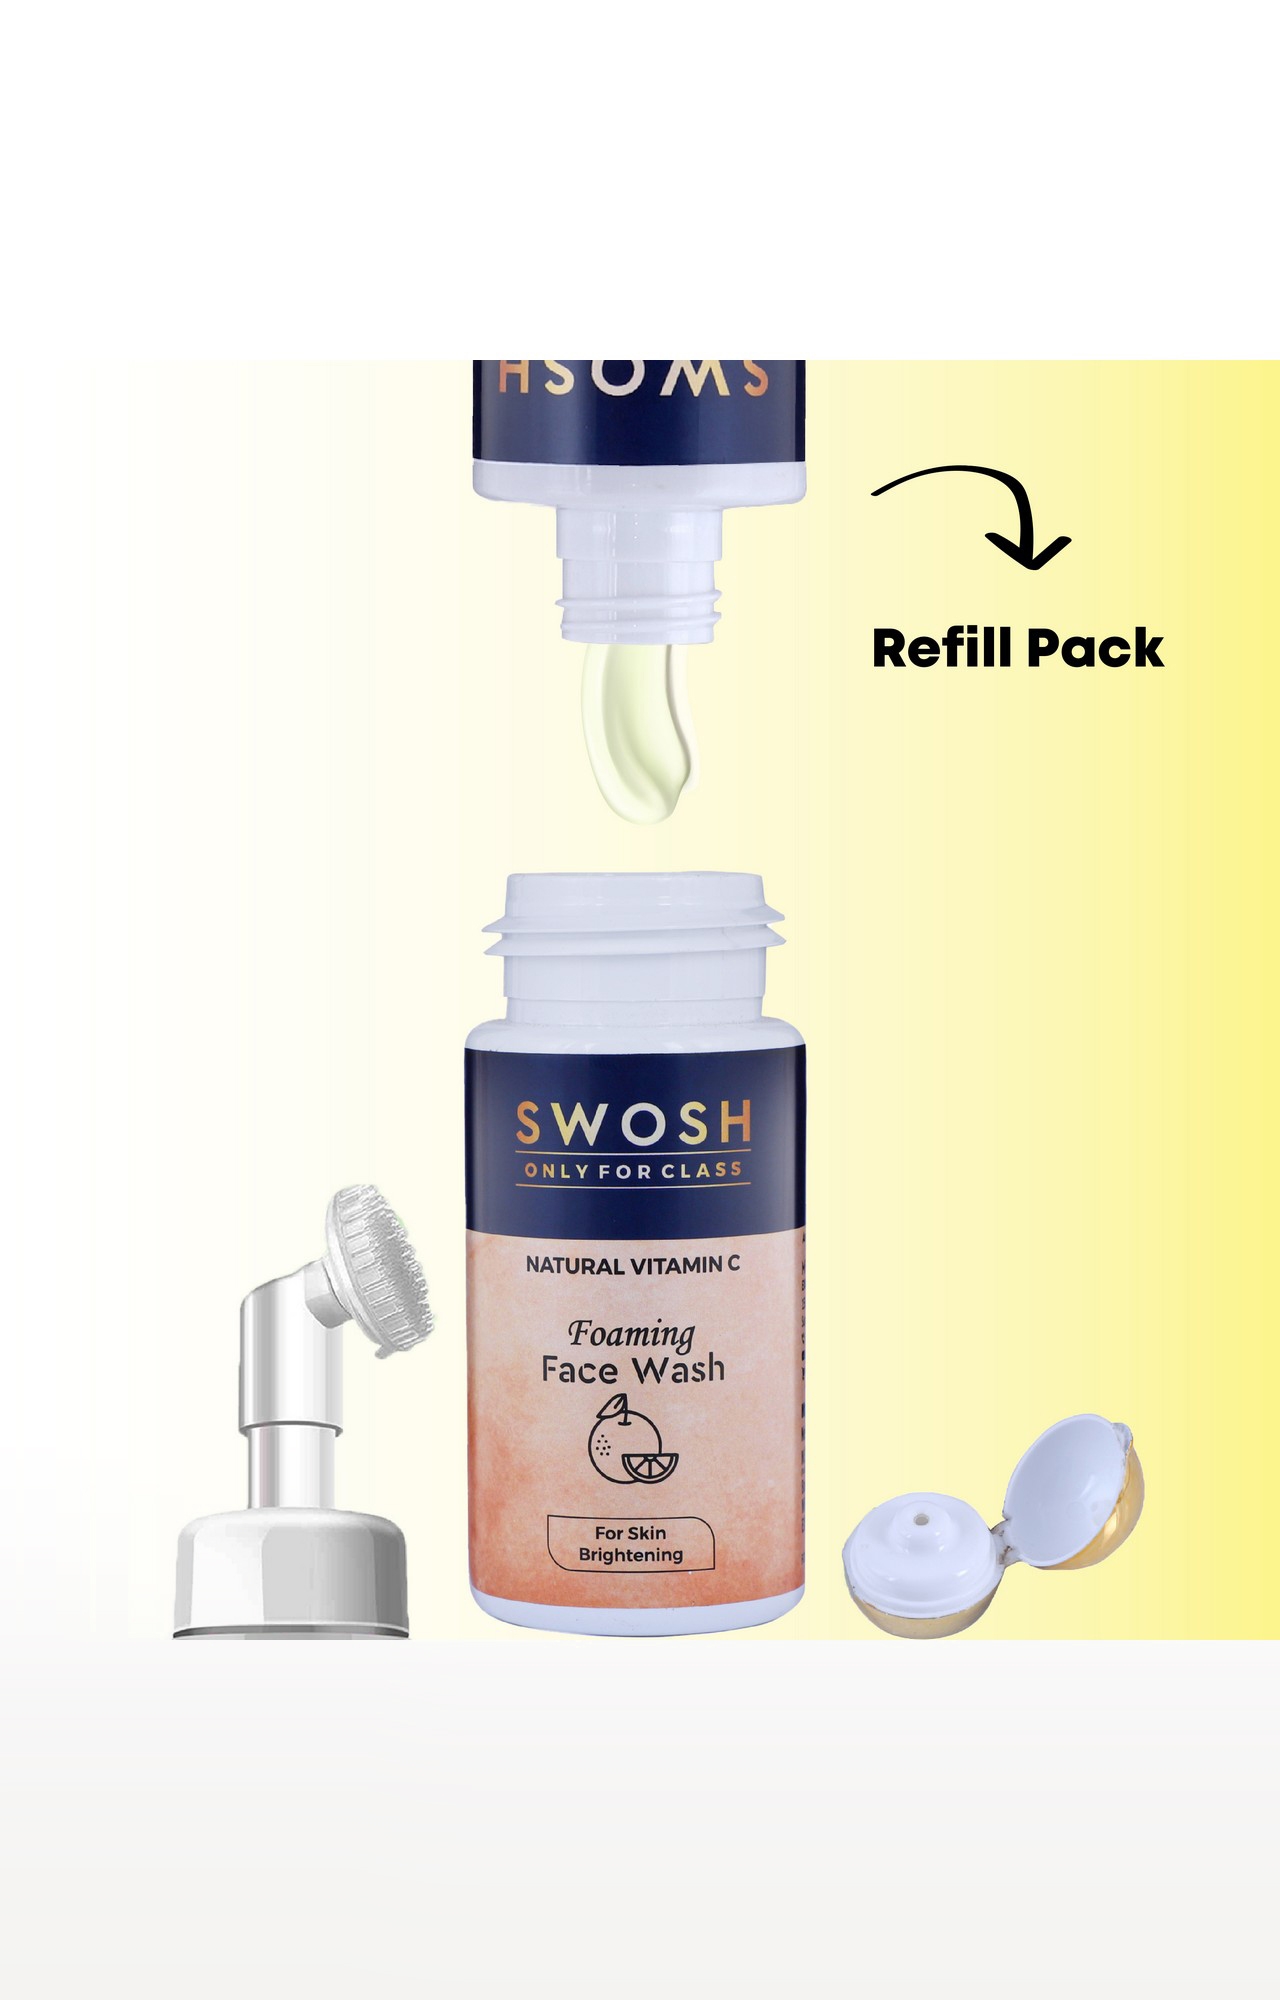 SWOSH | Swosh Natural Vitamin C Foaming Face Wash 2 In 1 Refill Pack For Pimple Prone & Oily Skin - No Parabens, Sulphate, Silicones & Colour, Pack Of 200 Ml 4